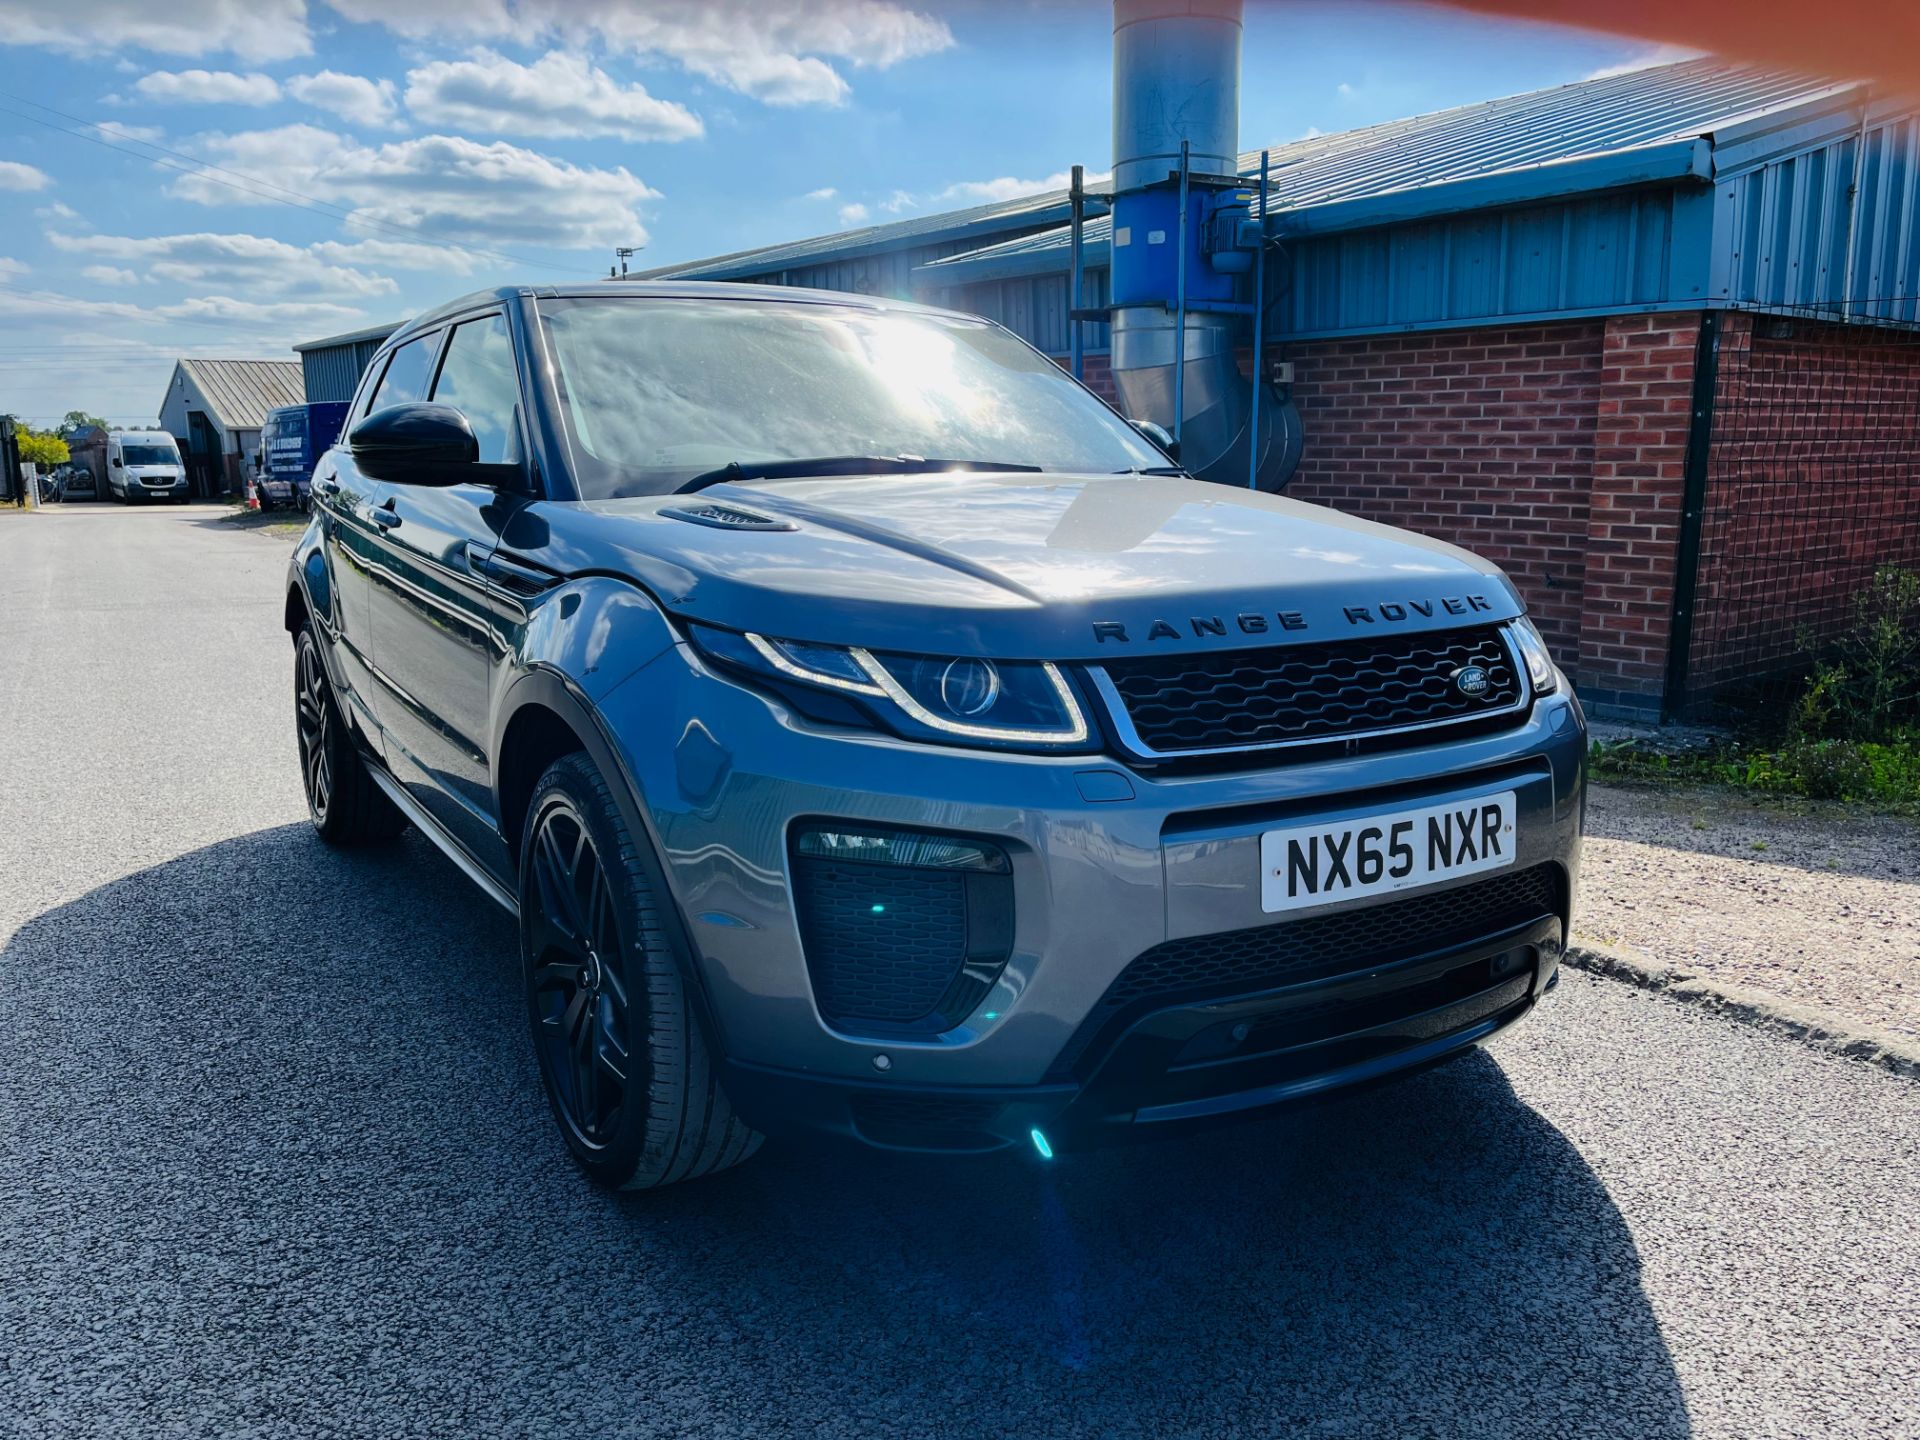 Range Rover Evoque Td4 Hse Dynamic (65 Reg) Auto Stop / Start - Full Leather -Rear Camera -High Spec - Image 3 of 29